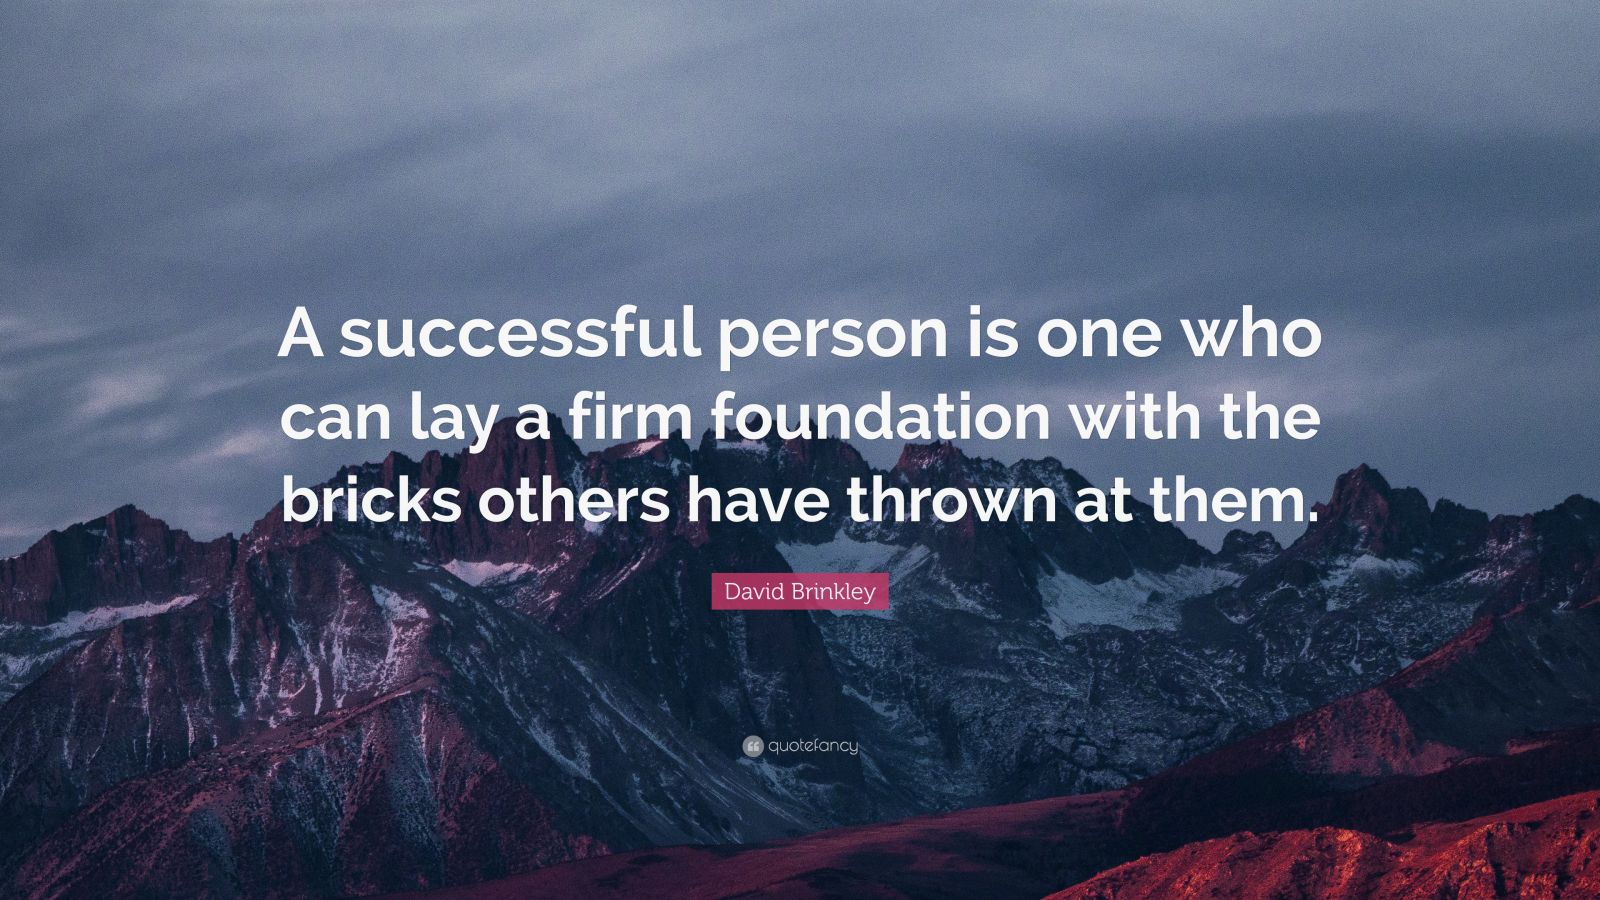 David Brinkley Quote: “A successful man is one who can lay a firm ...